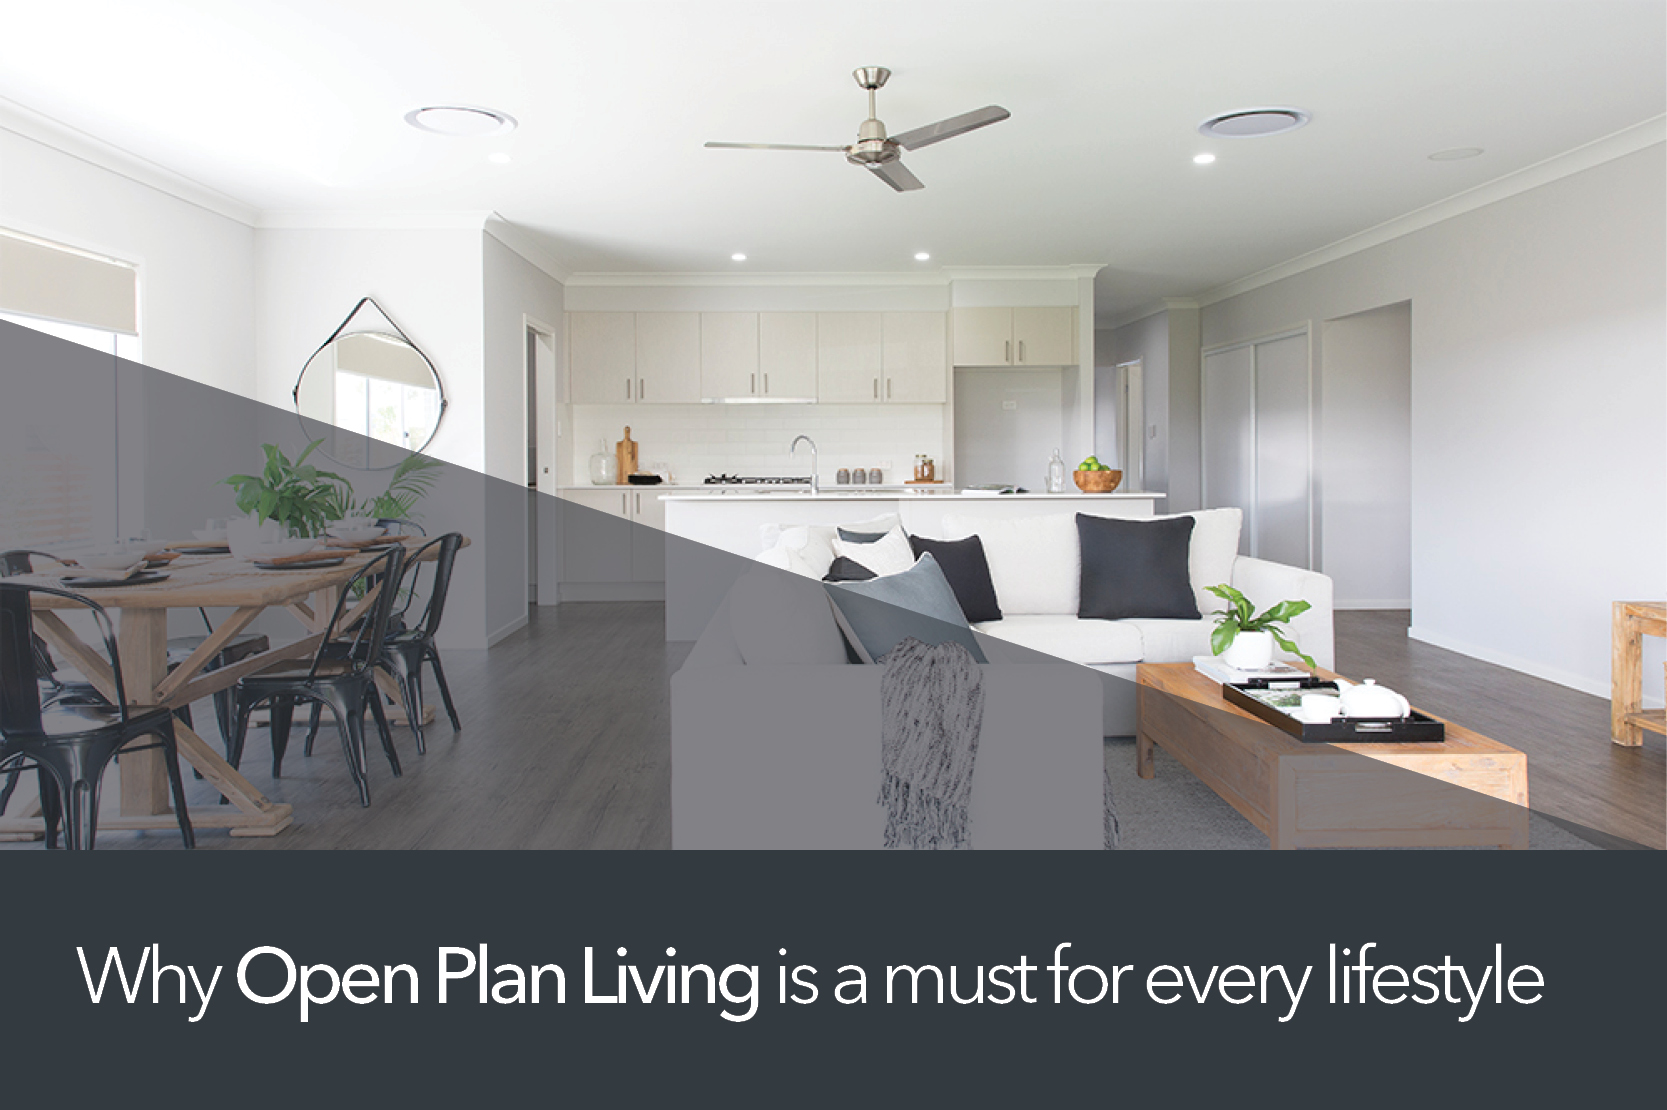 Why Open Plan Living is a must for every lifestyle